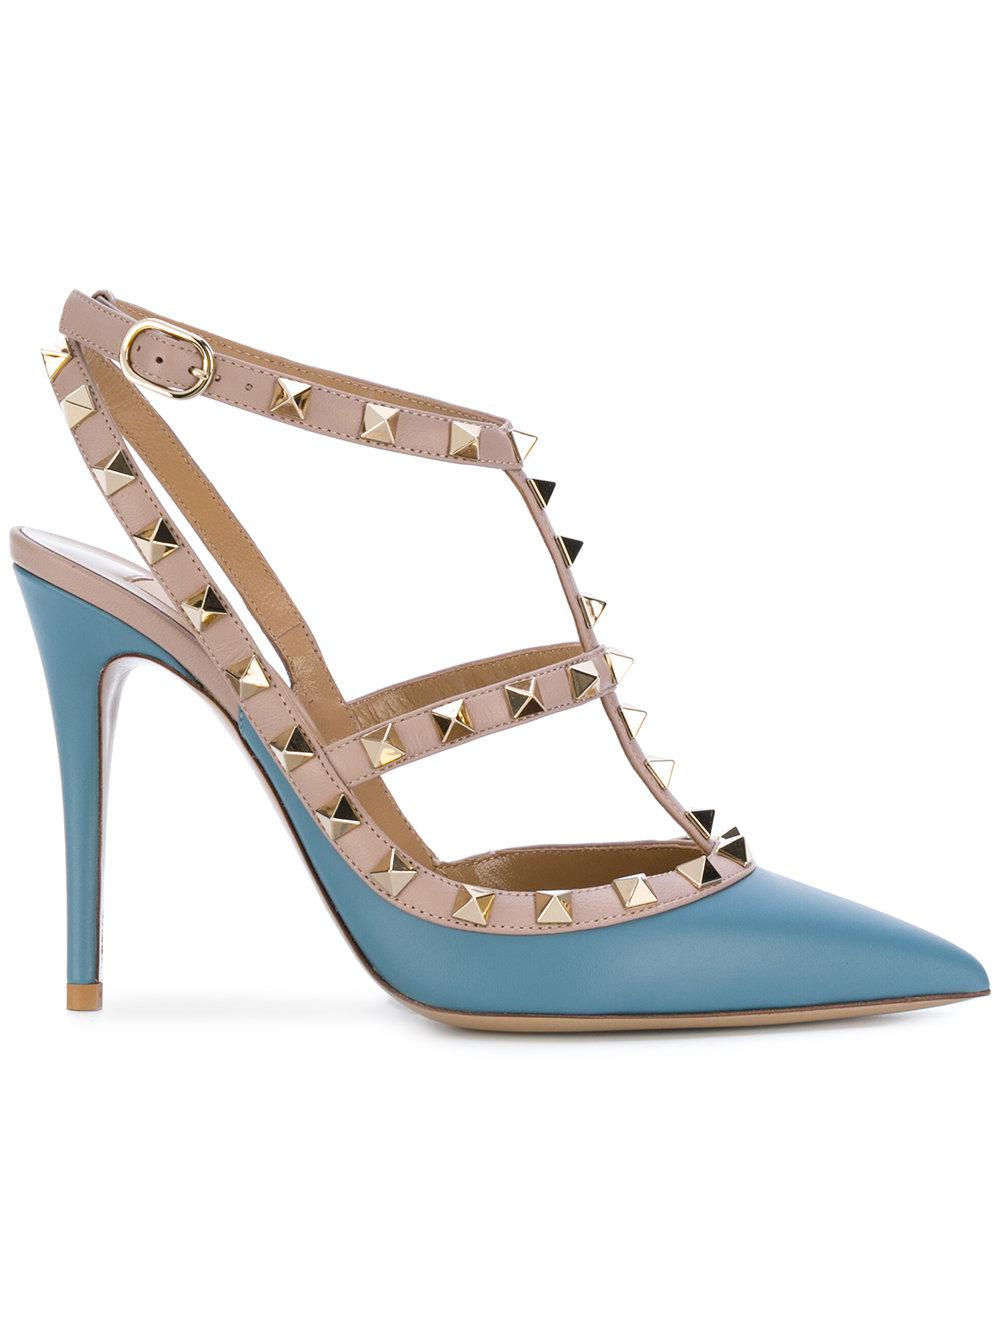 Valentino Leather Rockstud Ankle Straps in Blue - Lyst